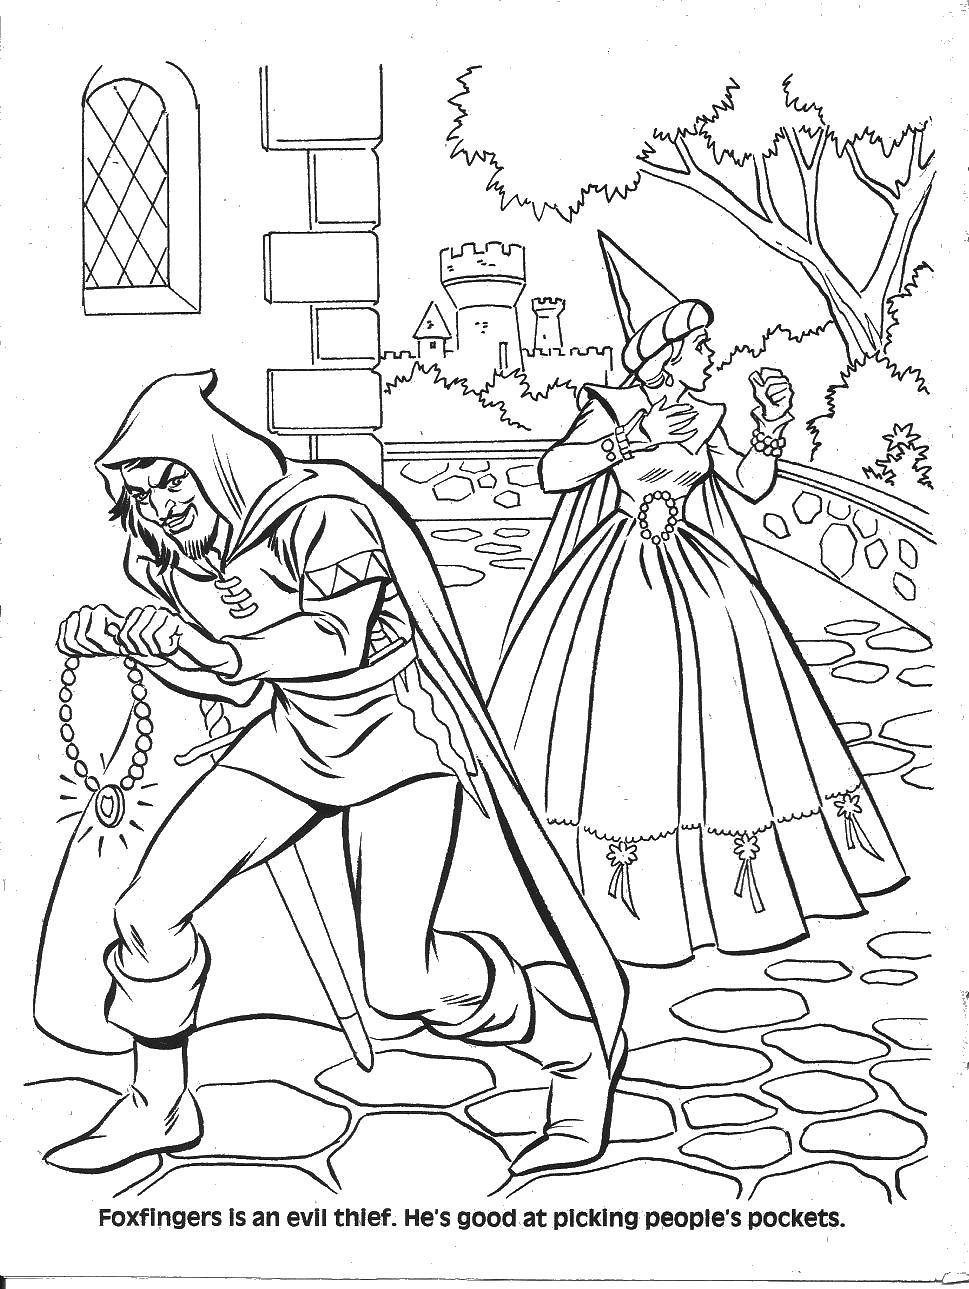 Coloring The evil thief faxfinder. Category The characters from fairy tales. Tags:  the thief, Foxfire.